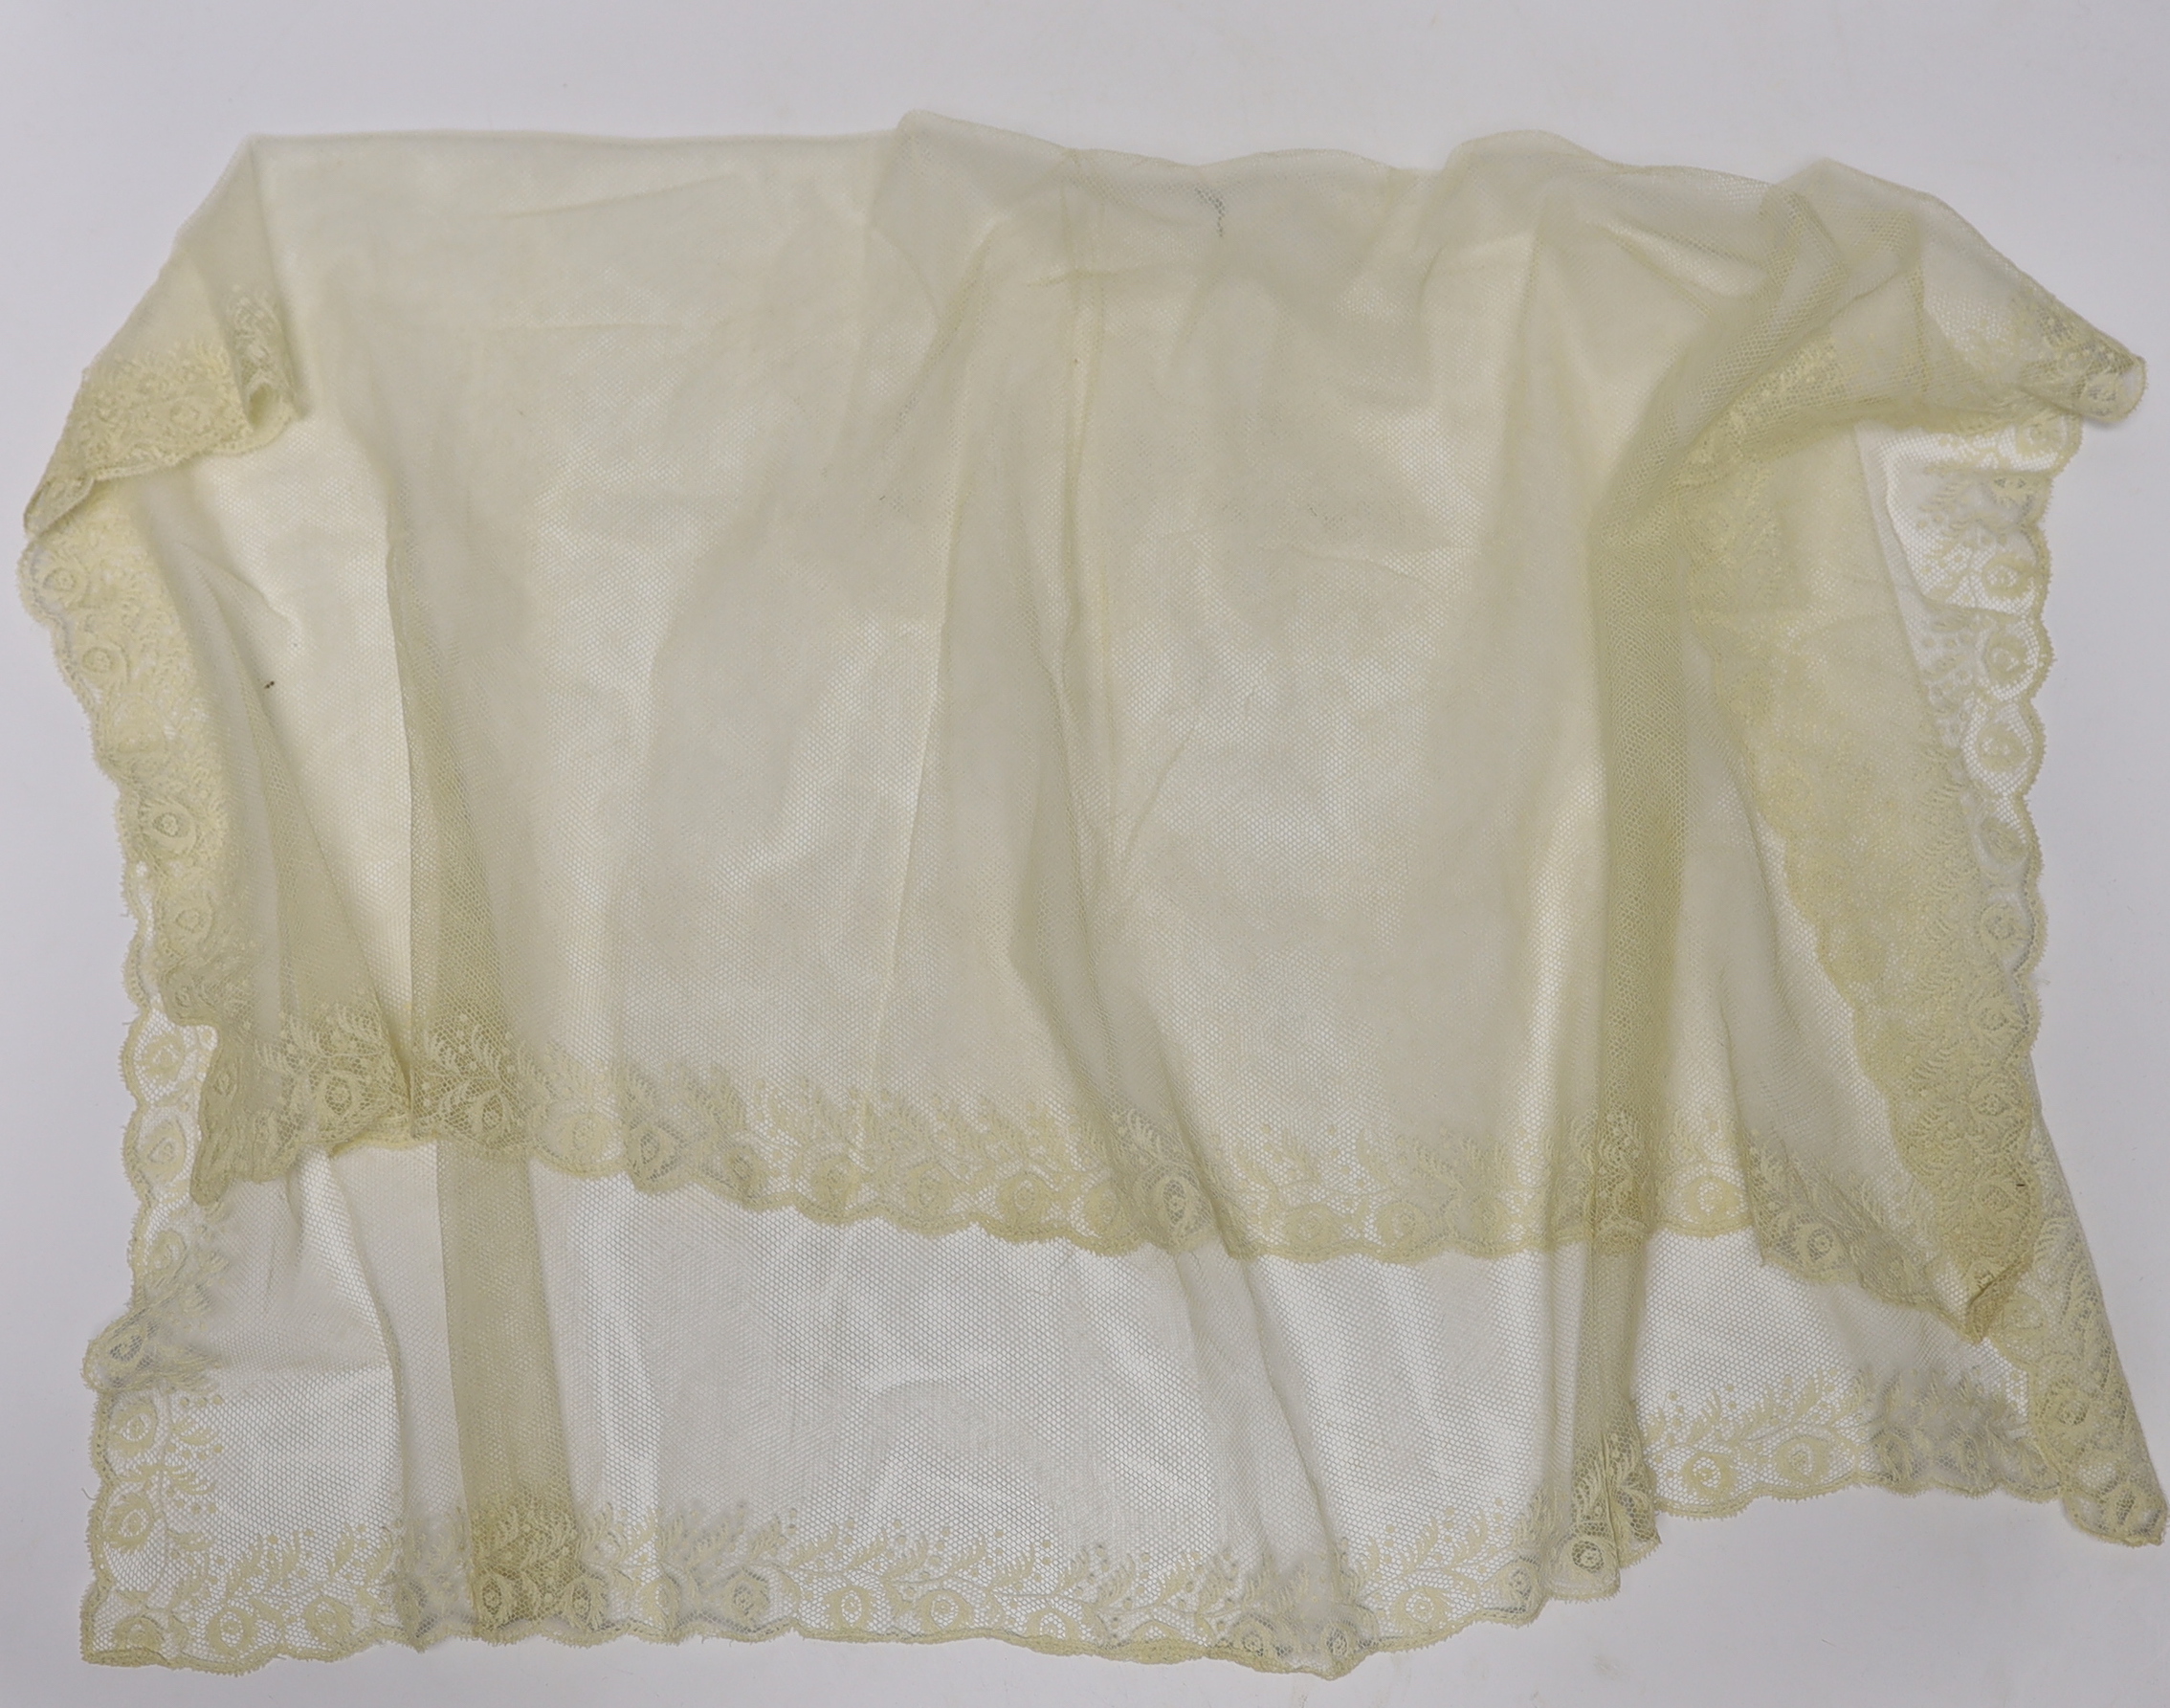 A long 19th century mixed Brussels lace collar, with 20 needle lace oval insertions, a similar wider Honiton bobbin lace collar and a machine lace bonnet veil